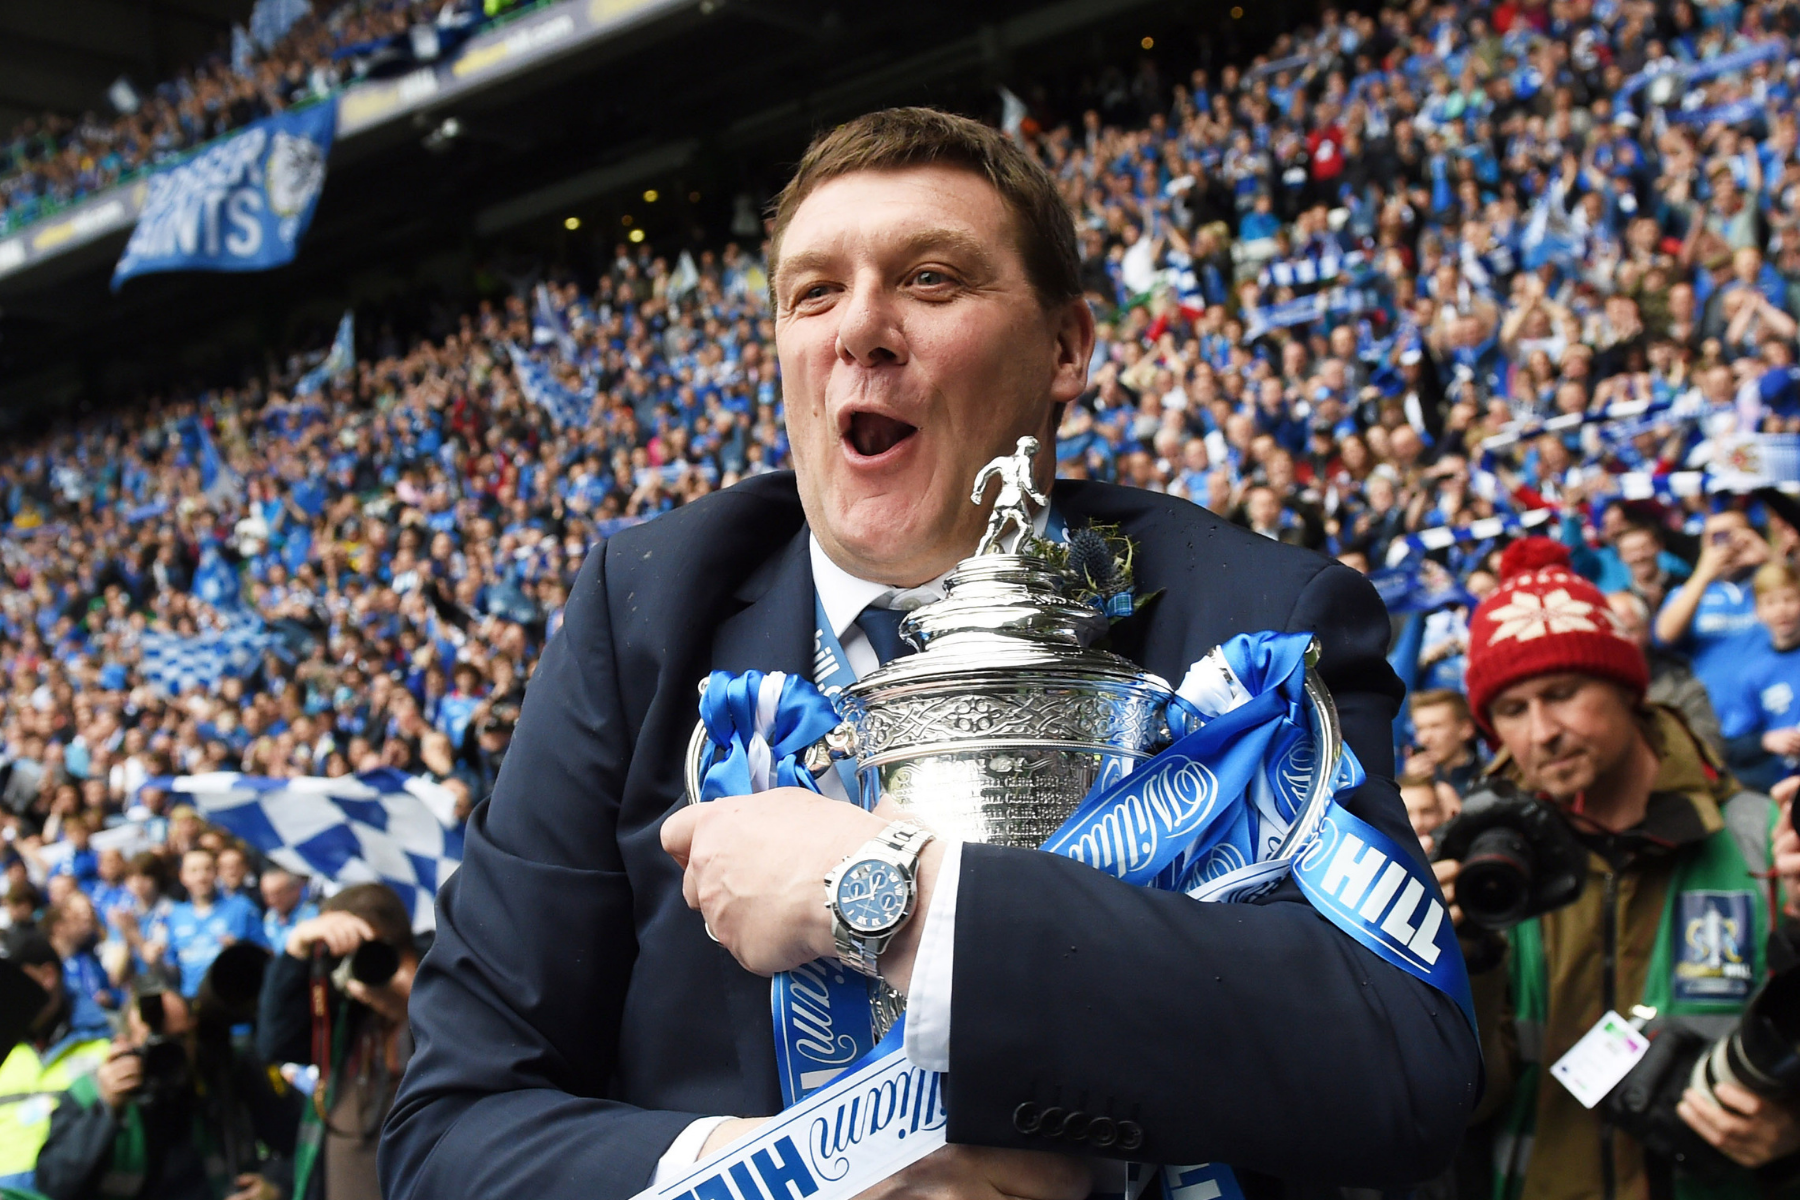 Aidan Smith: Kilmarnock can ignite big things for St Johnstone's greatest ever manager Tommy Wright